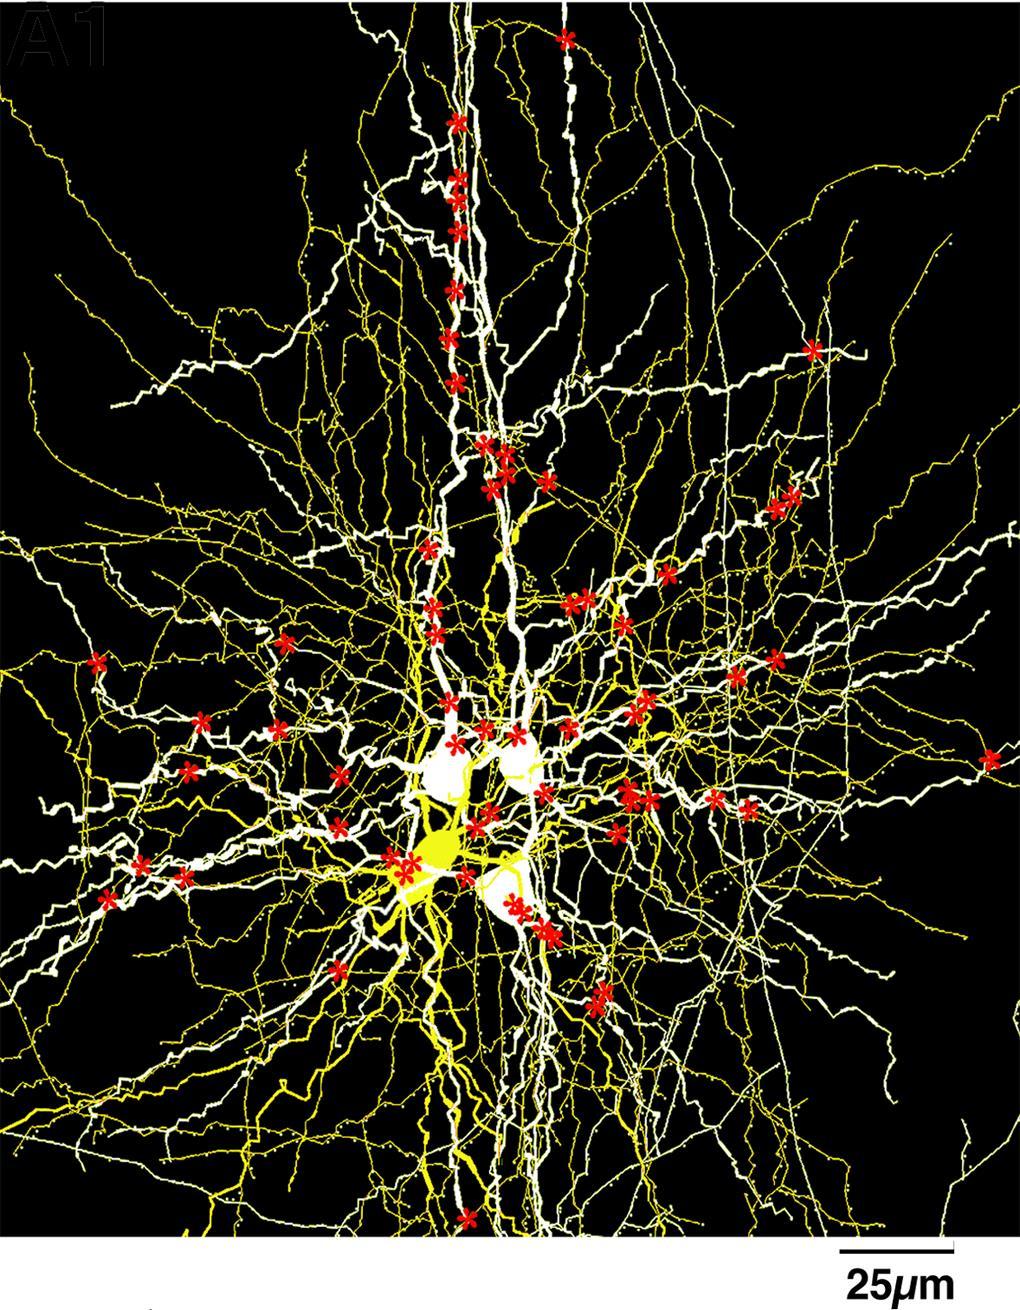 A Synaptic Innervation Patters to Determine Precise 3D Location of all synapses #synapses LBC PC 15 Axonal Patterns Dendritic